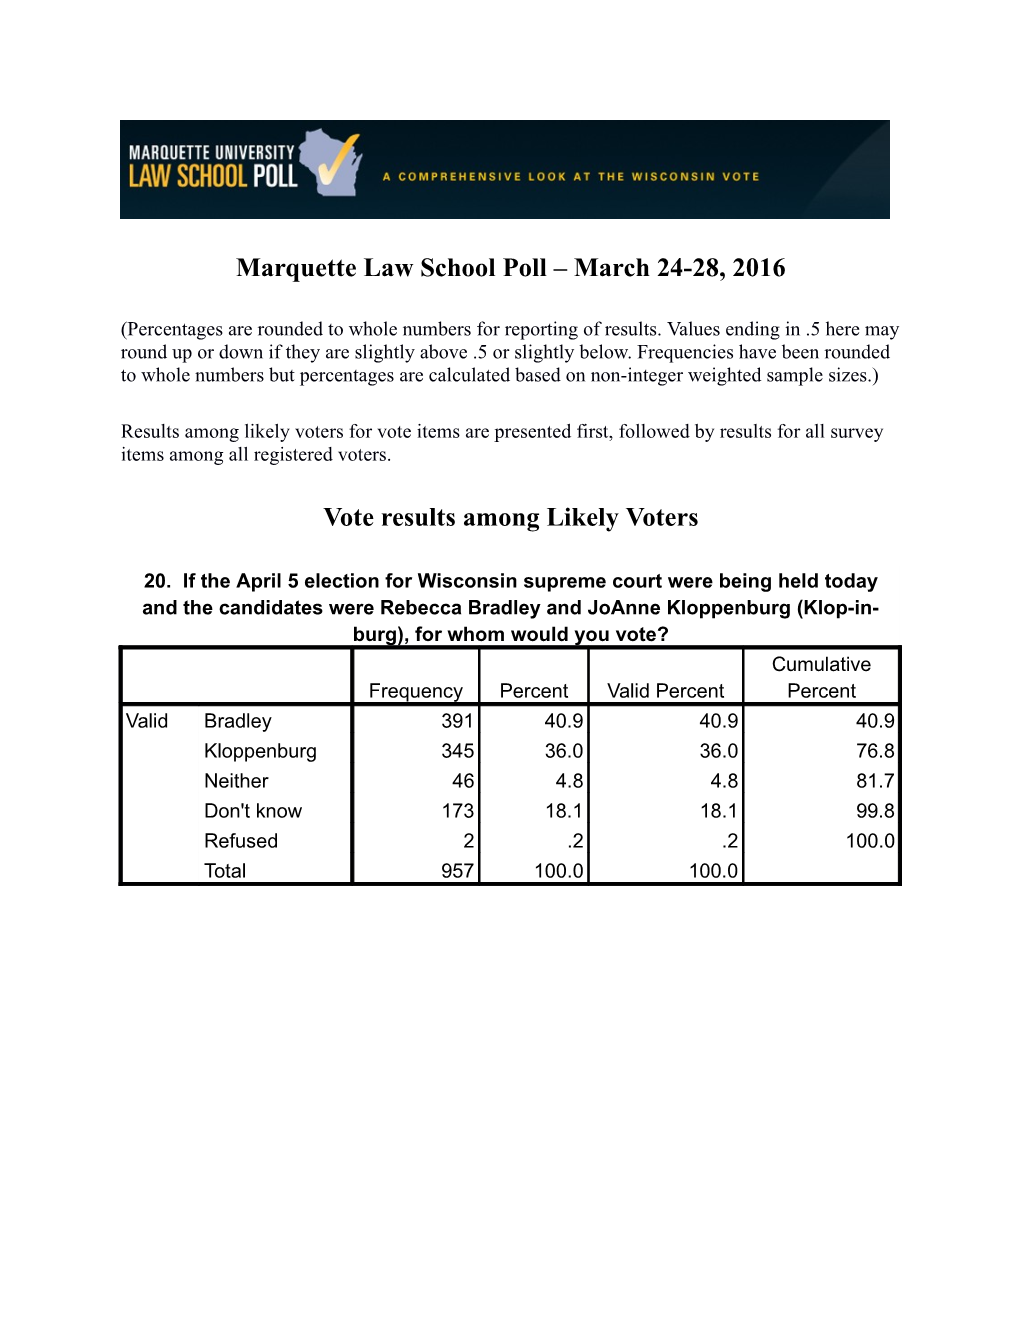 March 24-28, 2016 Vote Results Among Likely Voters